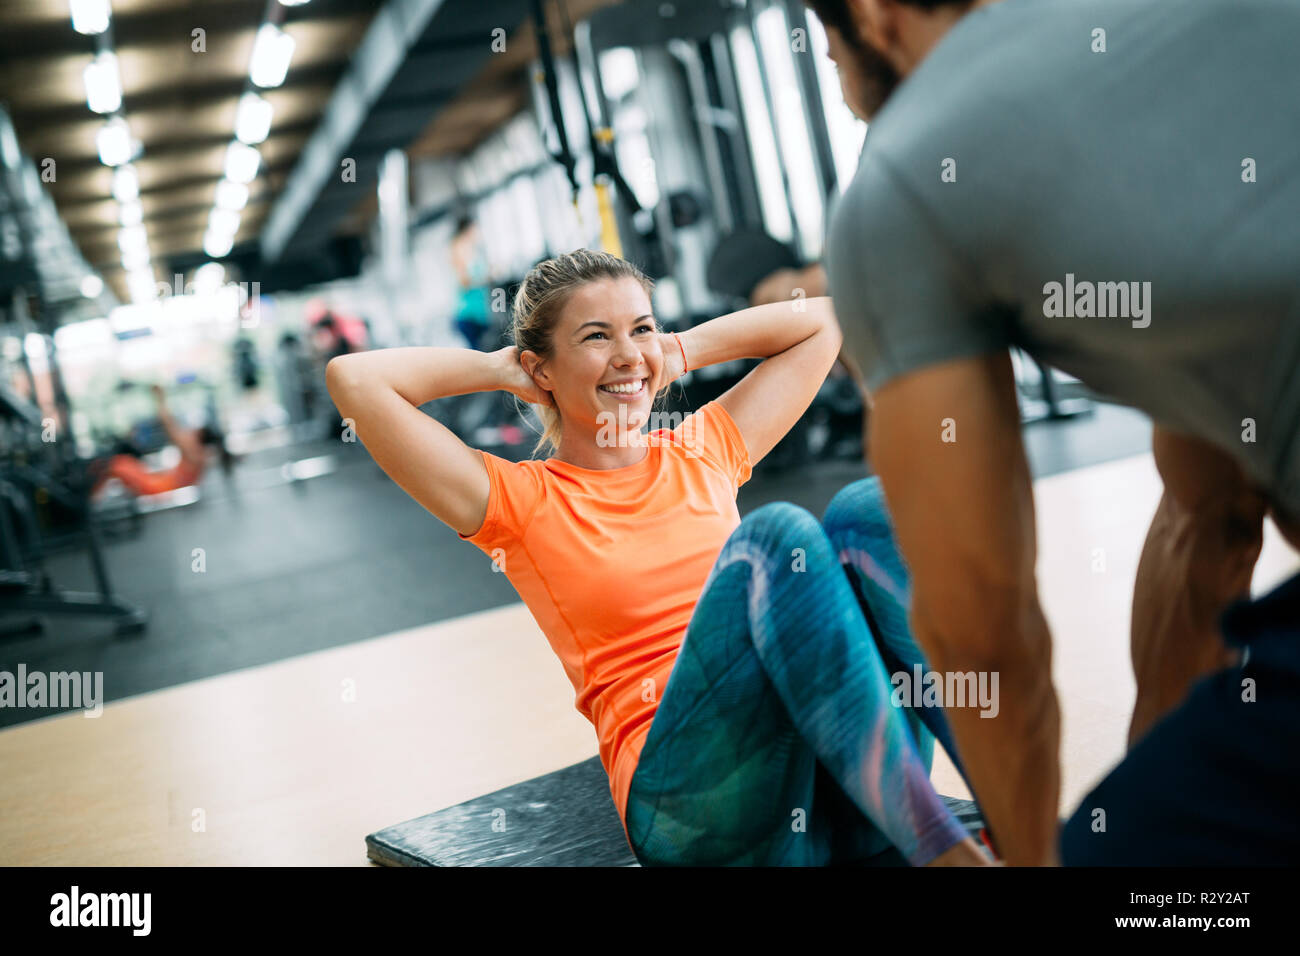 Personal Trainer Helping Woman at Gym Stock Image - Image of power, people:  39983181